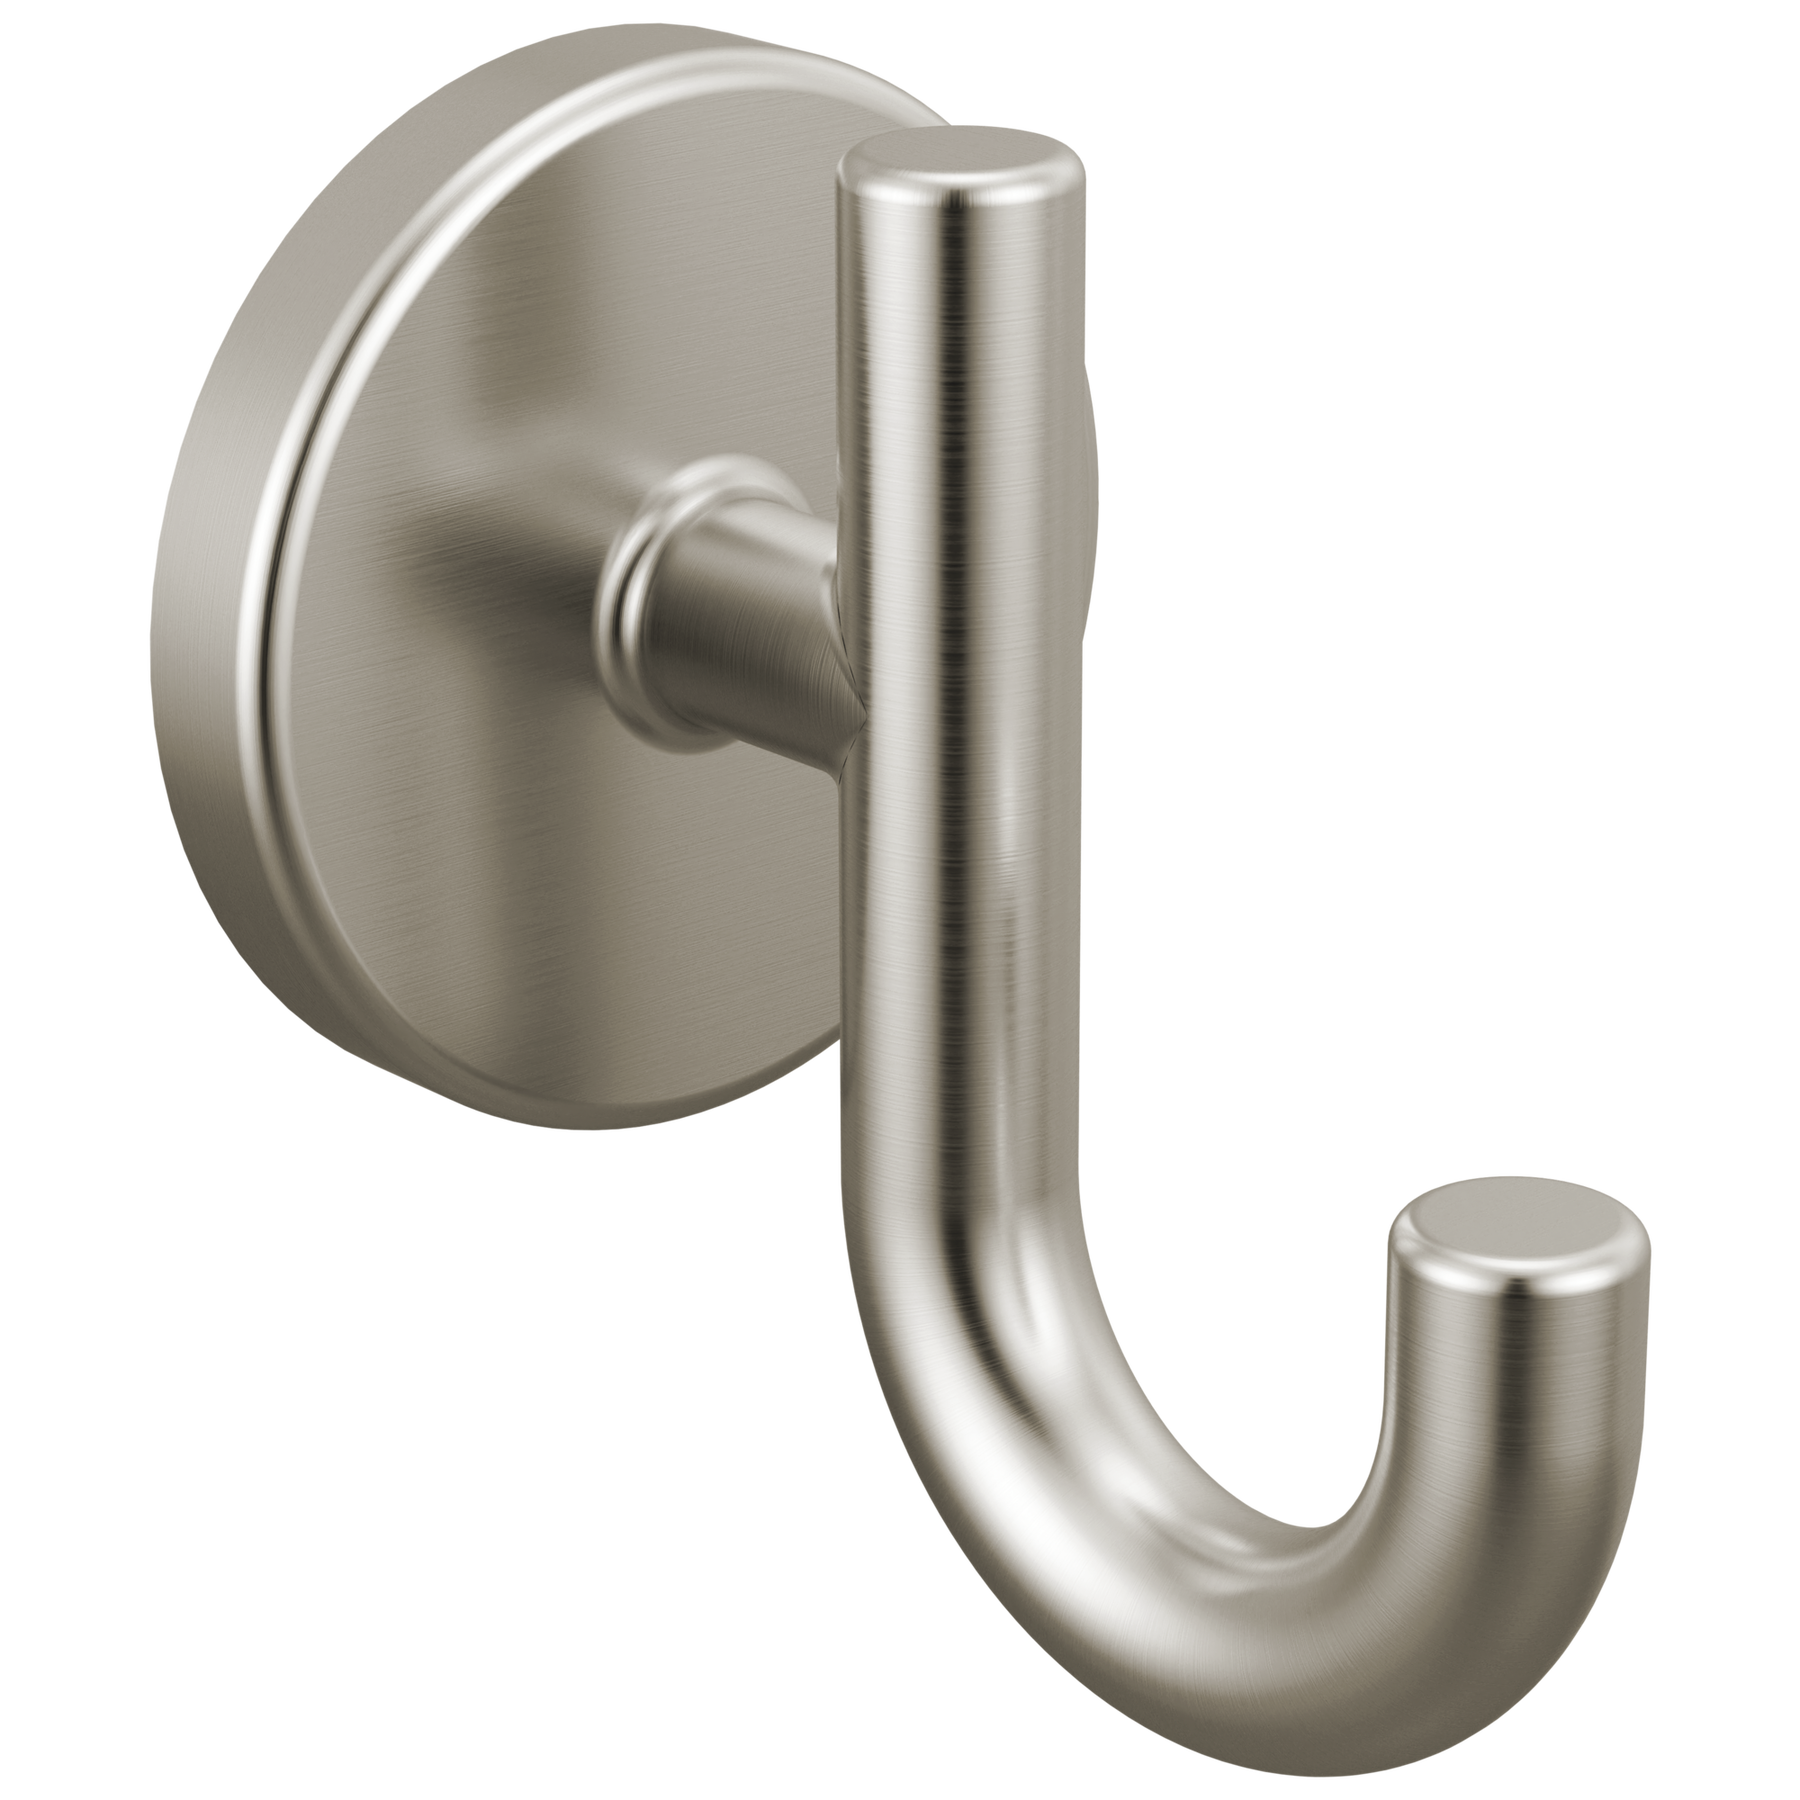 Robe Hook in Stainless 75935-SS